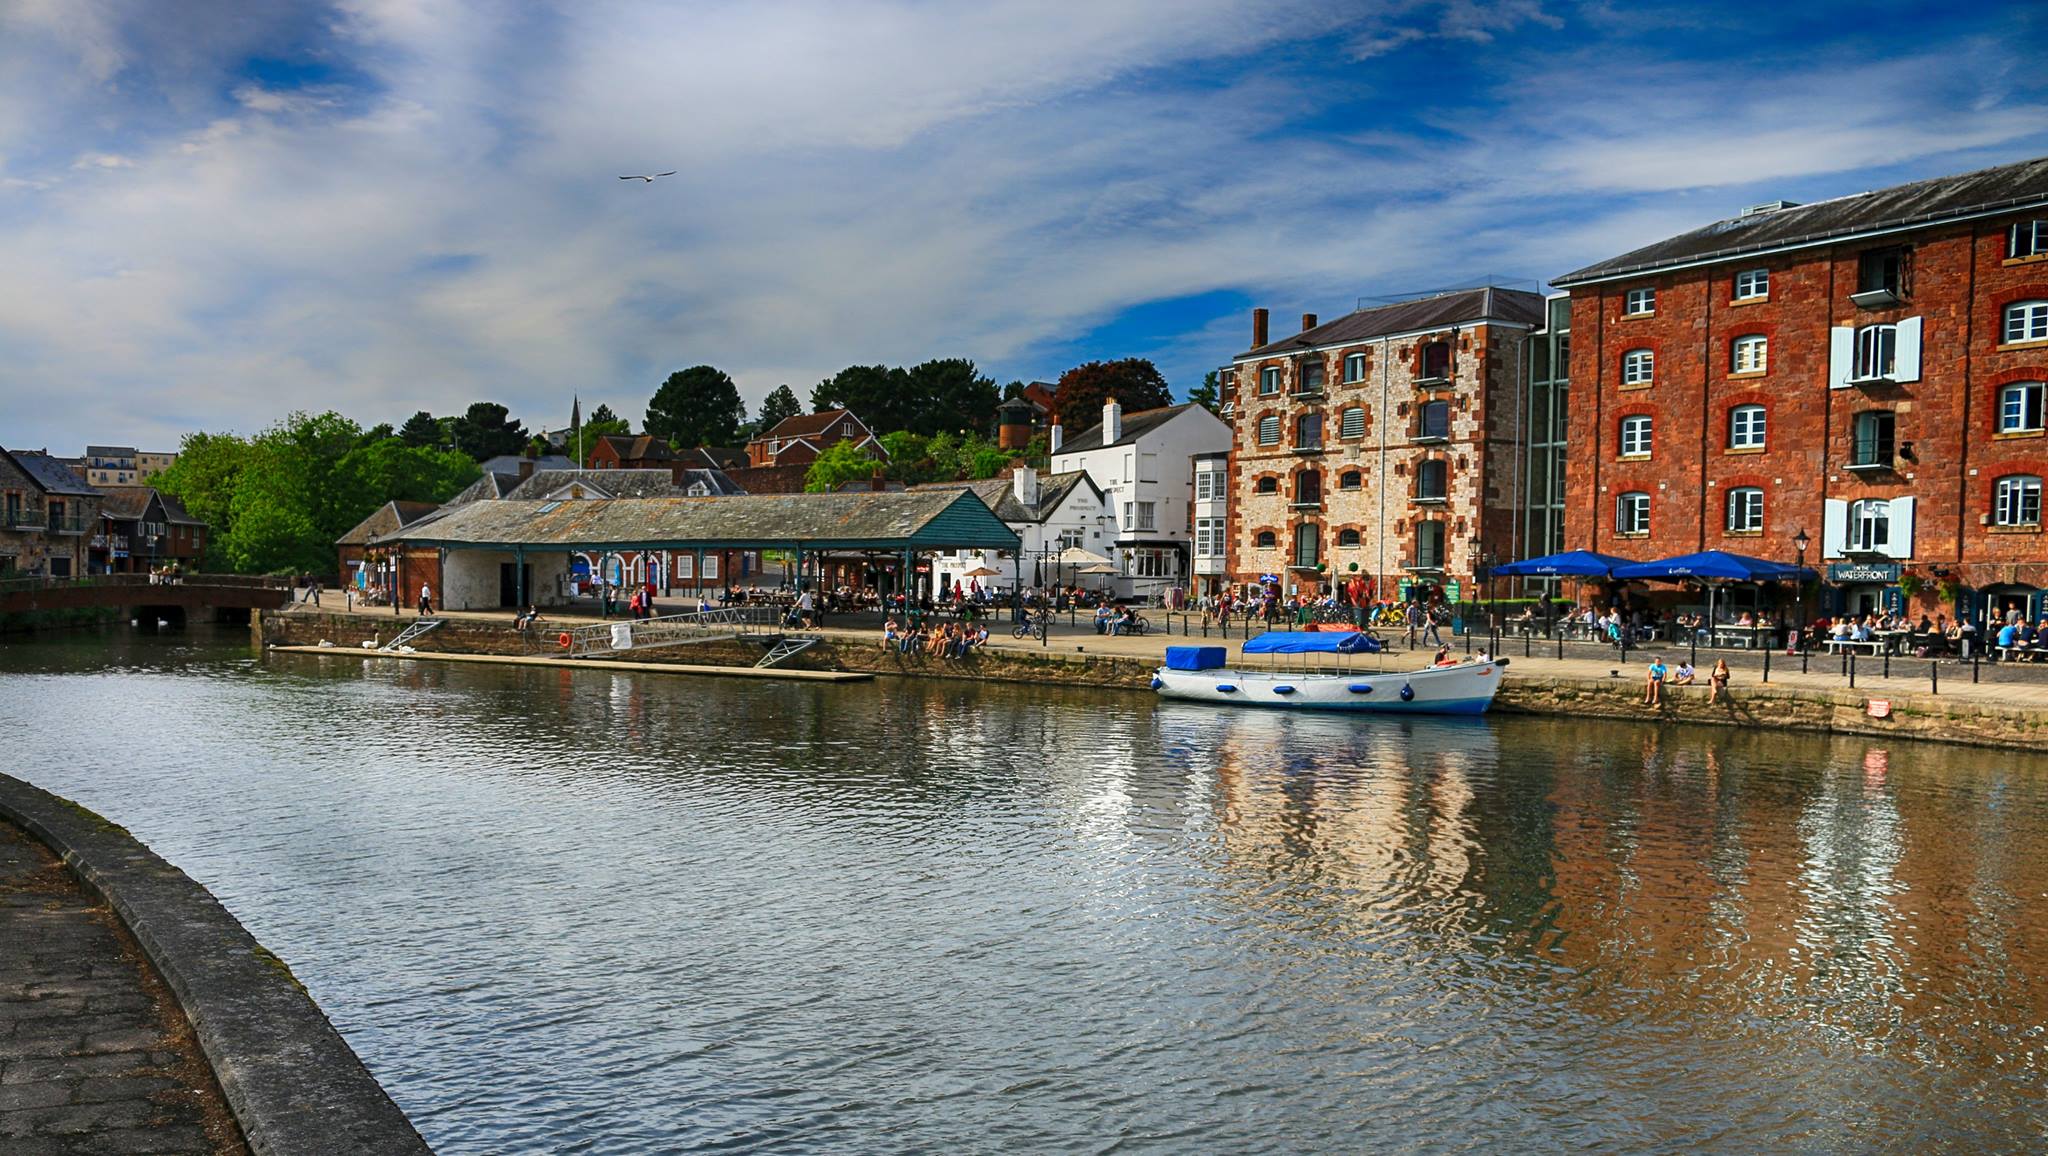 A riverside scene in Exeter. Photo by Florin Oresanu